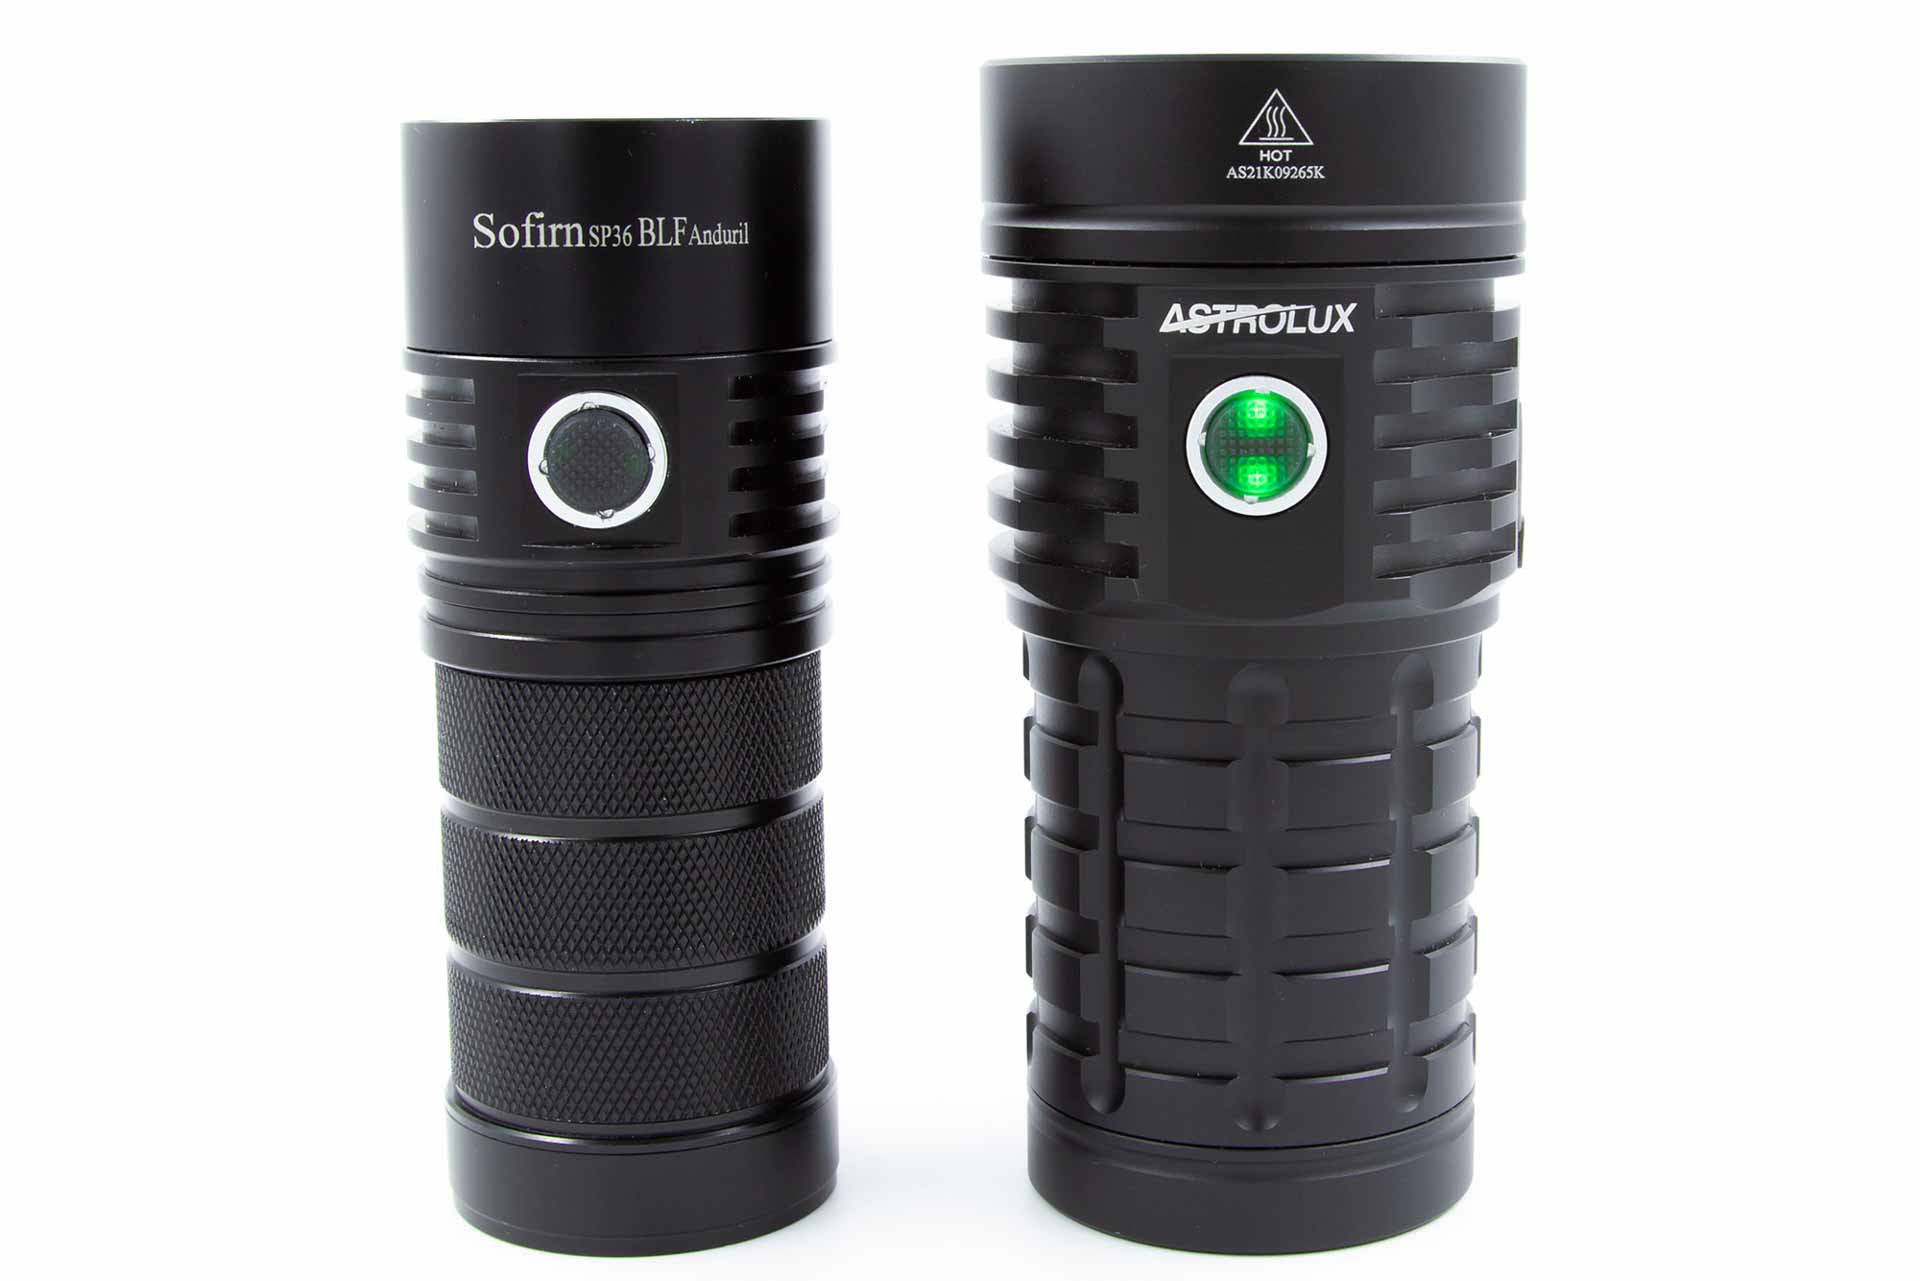 Astrolux EC06 compared to Sofirn BLF SP36